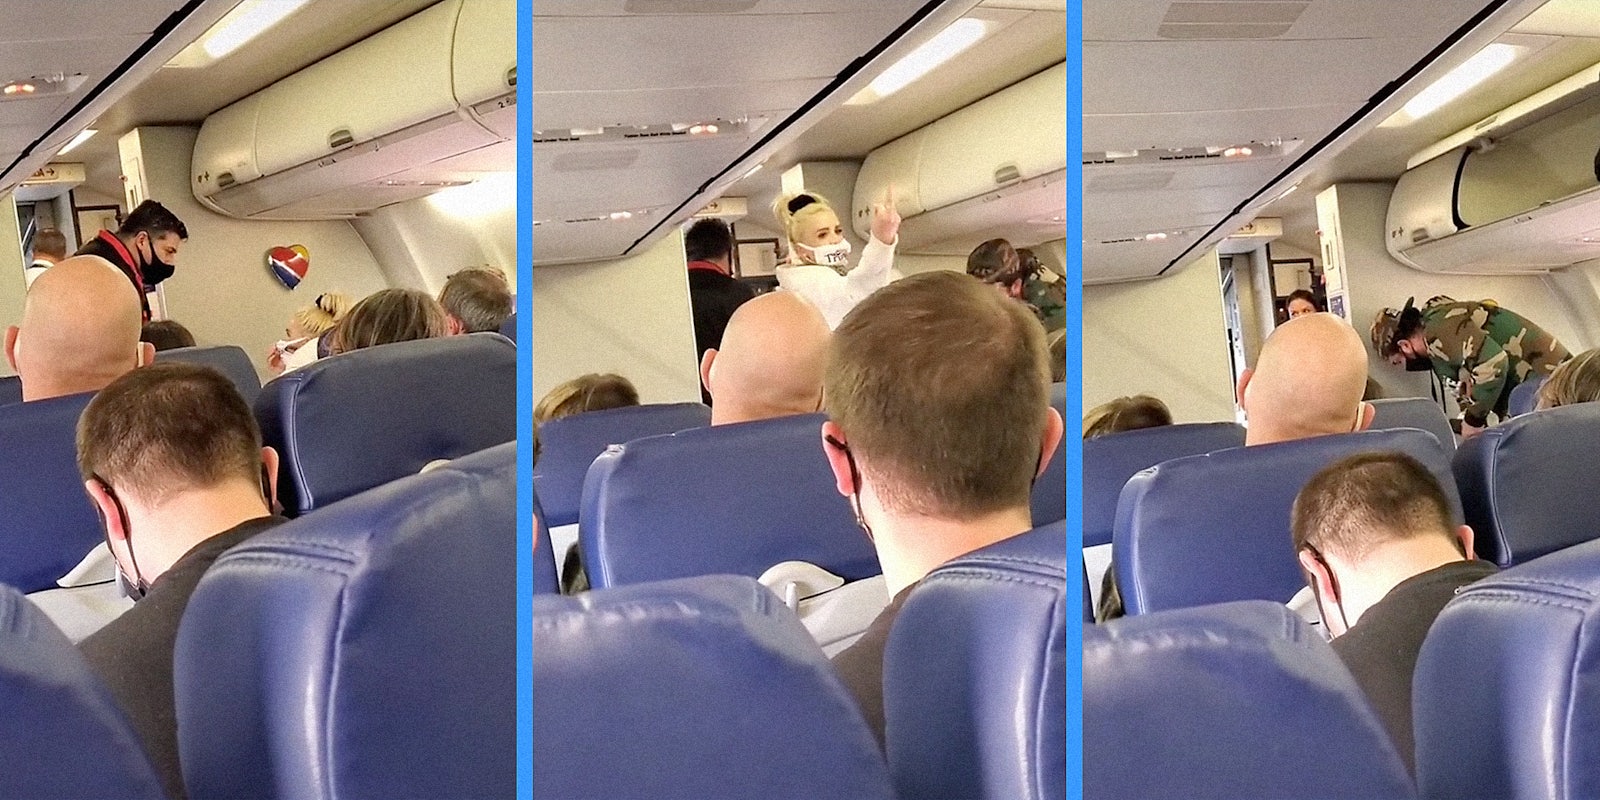 A couple getting kicked off of an airplane.